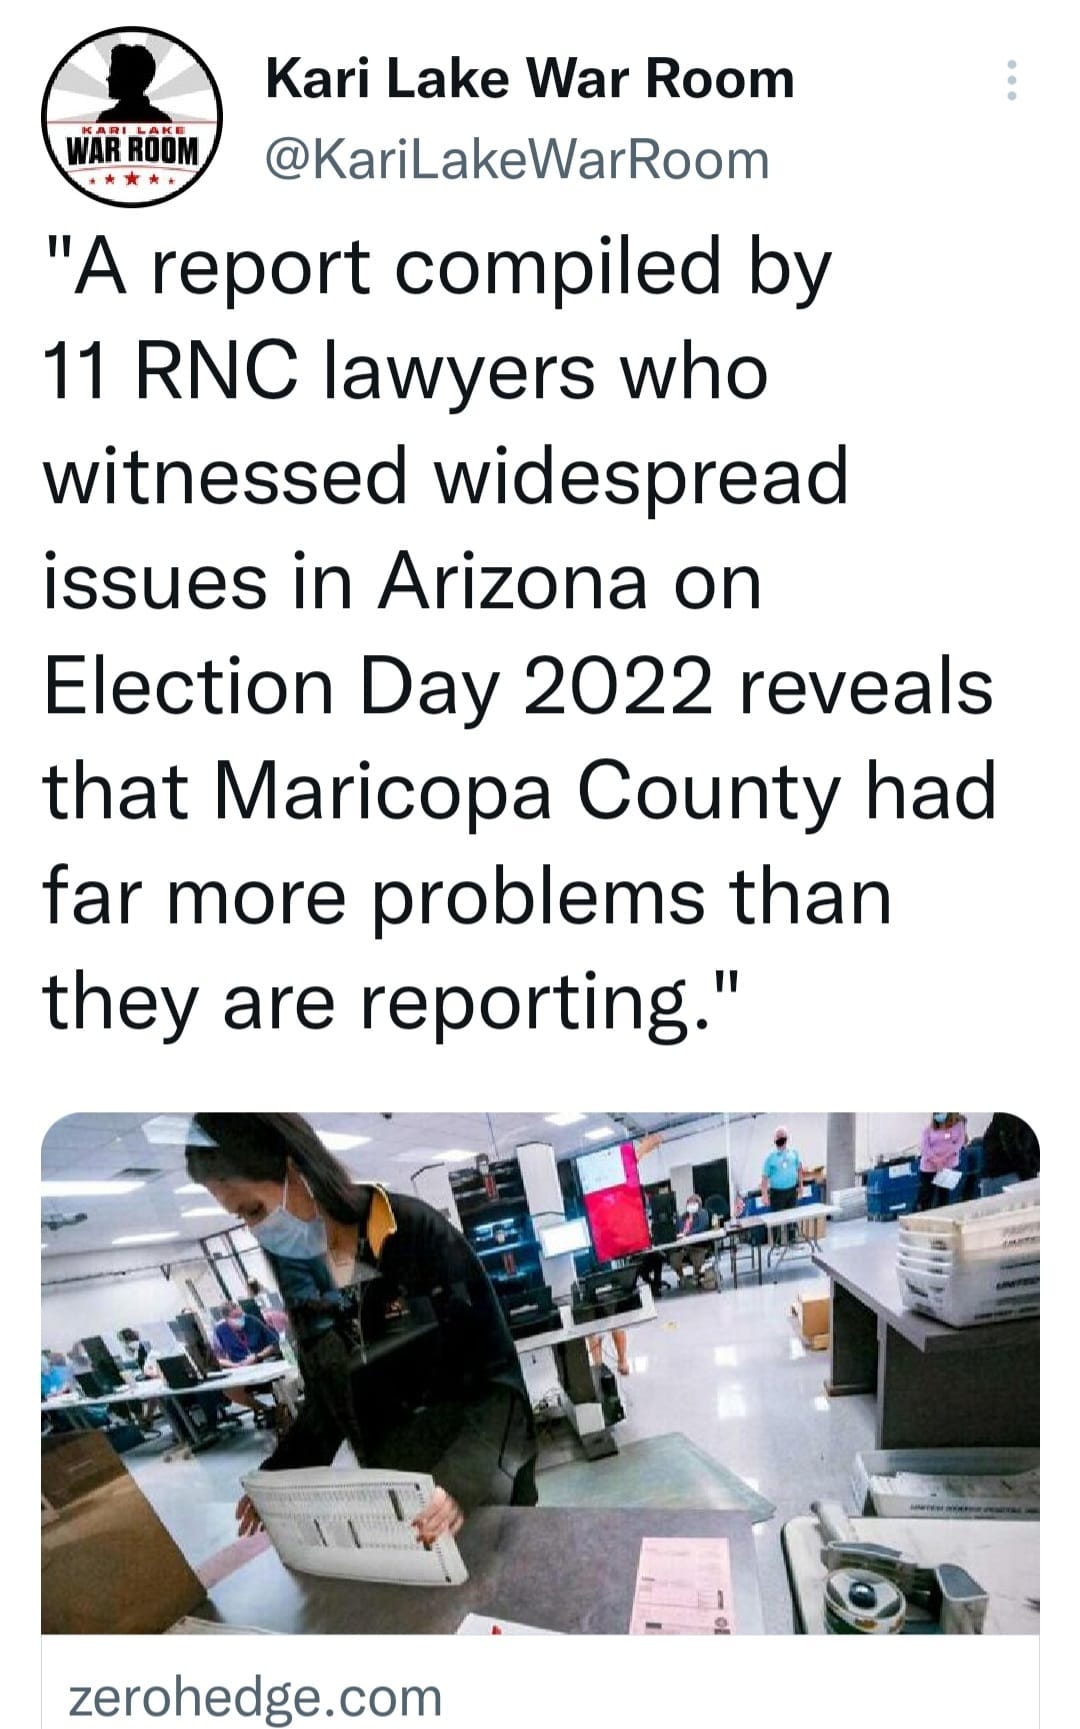 May be an image of 4 people and text that says 'Kari Lake War Room @KariLakeWarRoom "A report compiled by 11 RNC lawyers who witnessed widespread issues in Arizona on Election Day 2022 reveals that Maricopa County had far more problems than they are reporting." zerohedge.com'